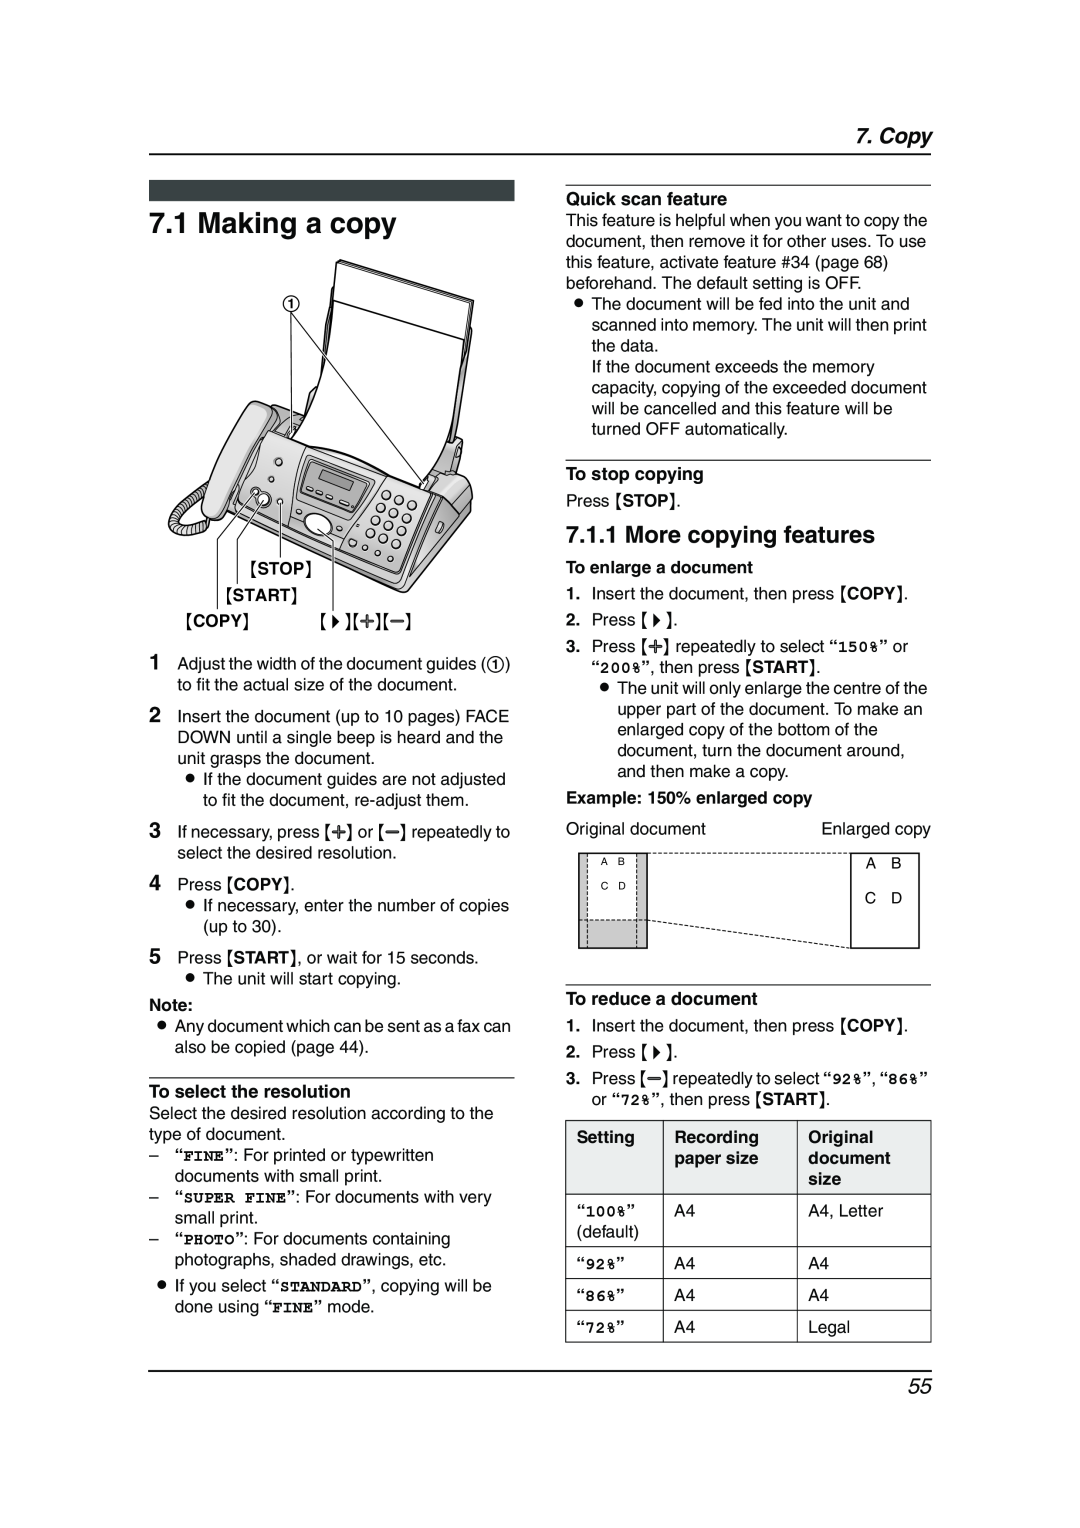 Panasonic KX-FC241AL Making a copy, More copying features, Copy, Stop Start, Quick scan feature, To stop copying, Setting 